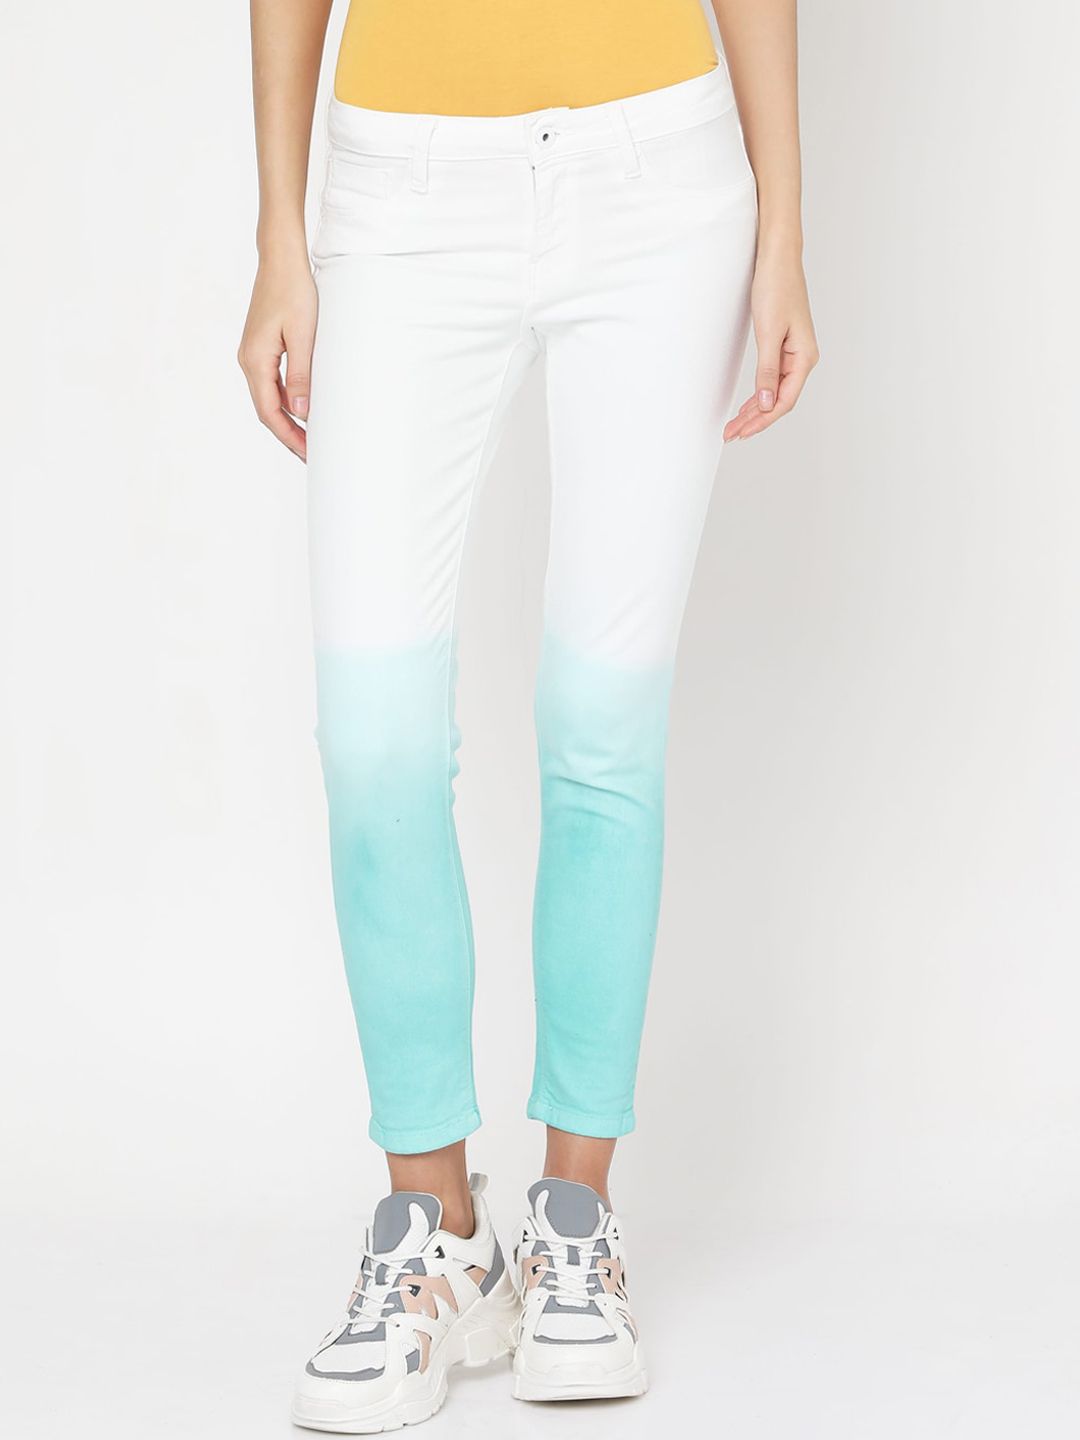 Pepe Jeans Women Blue & White Slim Fit Mid-Rise Clean Look Jeans Price in India